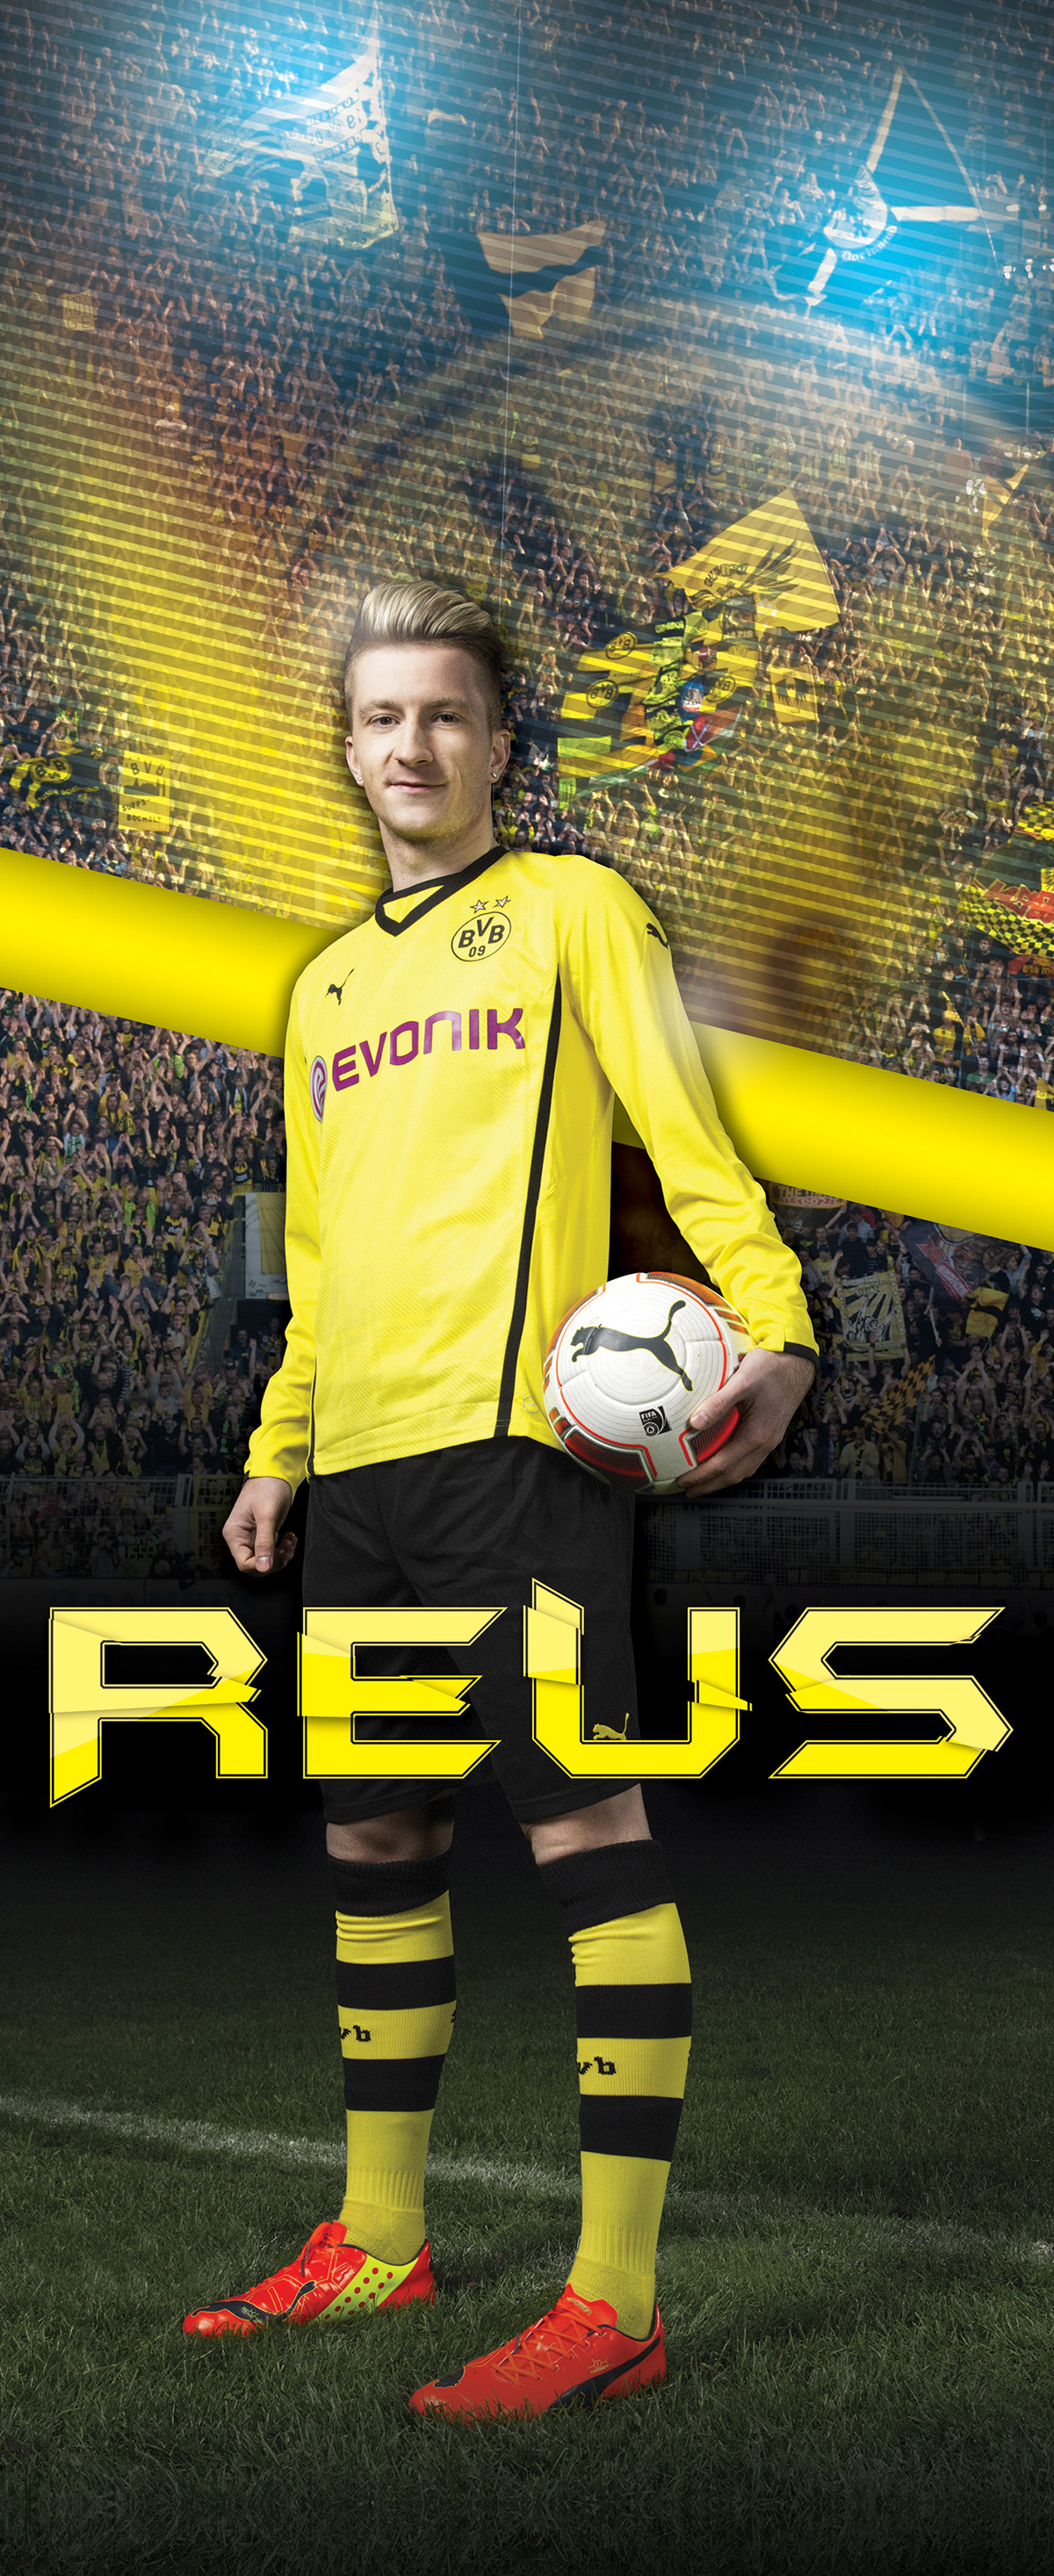 Rues Borussia Dortmund pvp football soccer posters WorldCup PSG